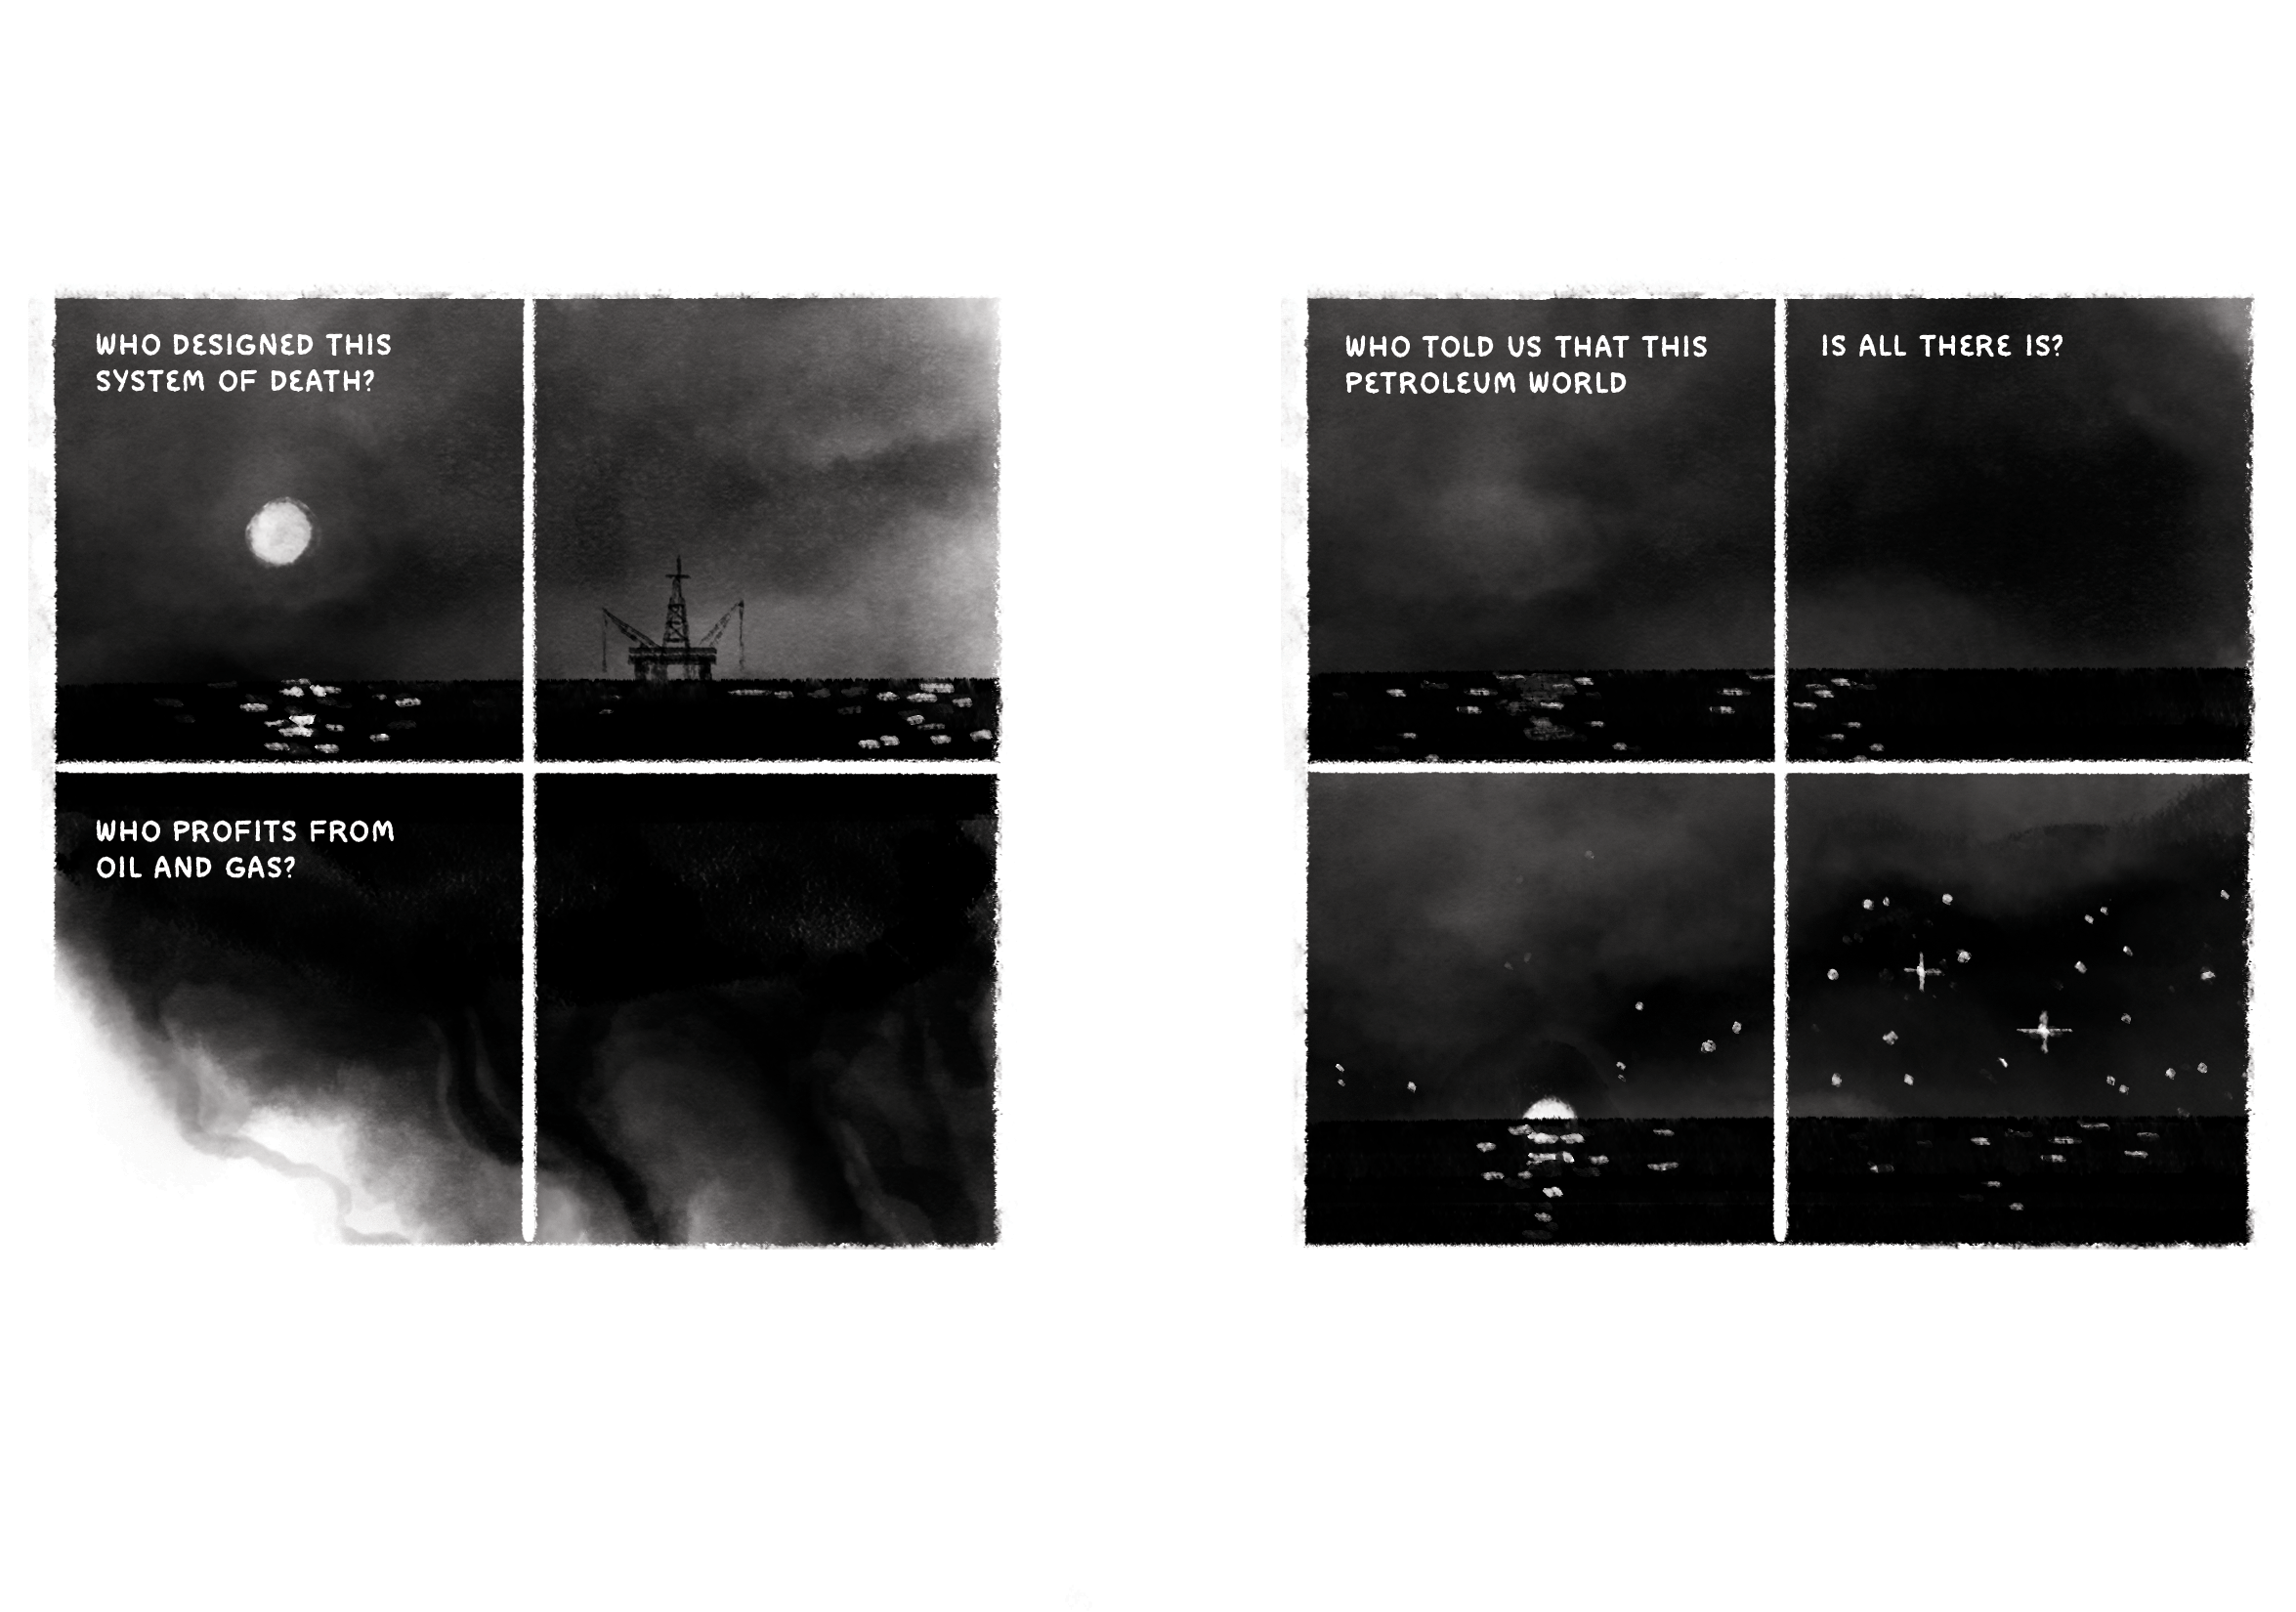 Two four-panel comics. First comic text: Who designed this system of death? Who profits from oil and gas? First comic images: A moon over the sea, with an oil rig visible in the distance. Oil mixing with water. Second comic text: Who told us that this petroleum world is all there is? Second comic image: A cloudy night sky over the sea begins to clear; a full moon is visible on the horizon; stars come out. 